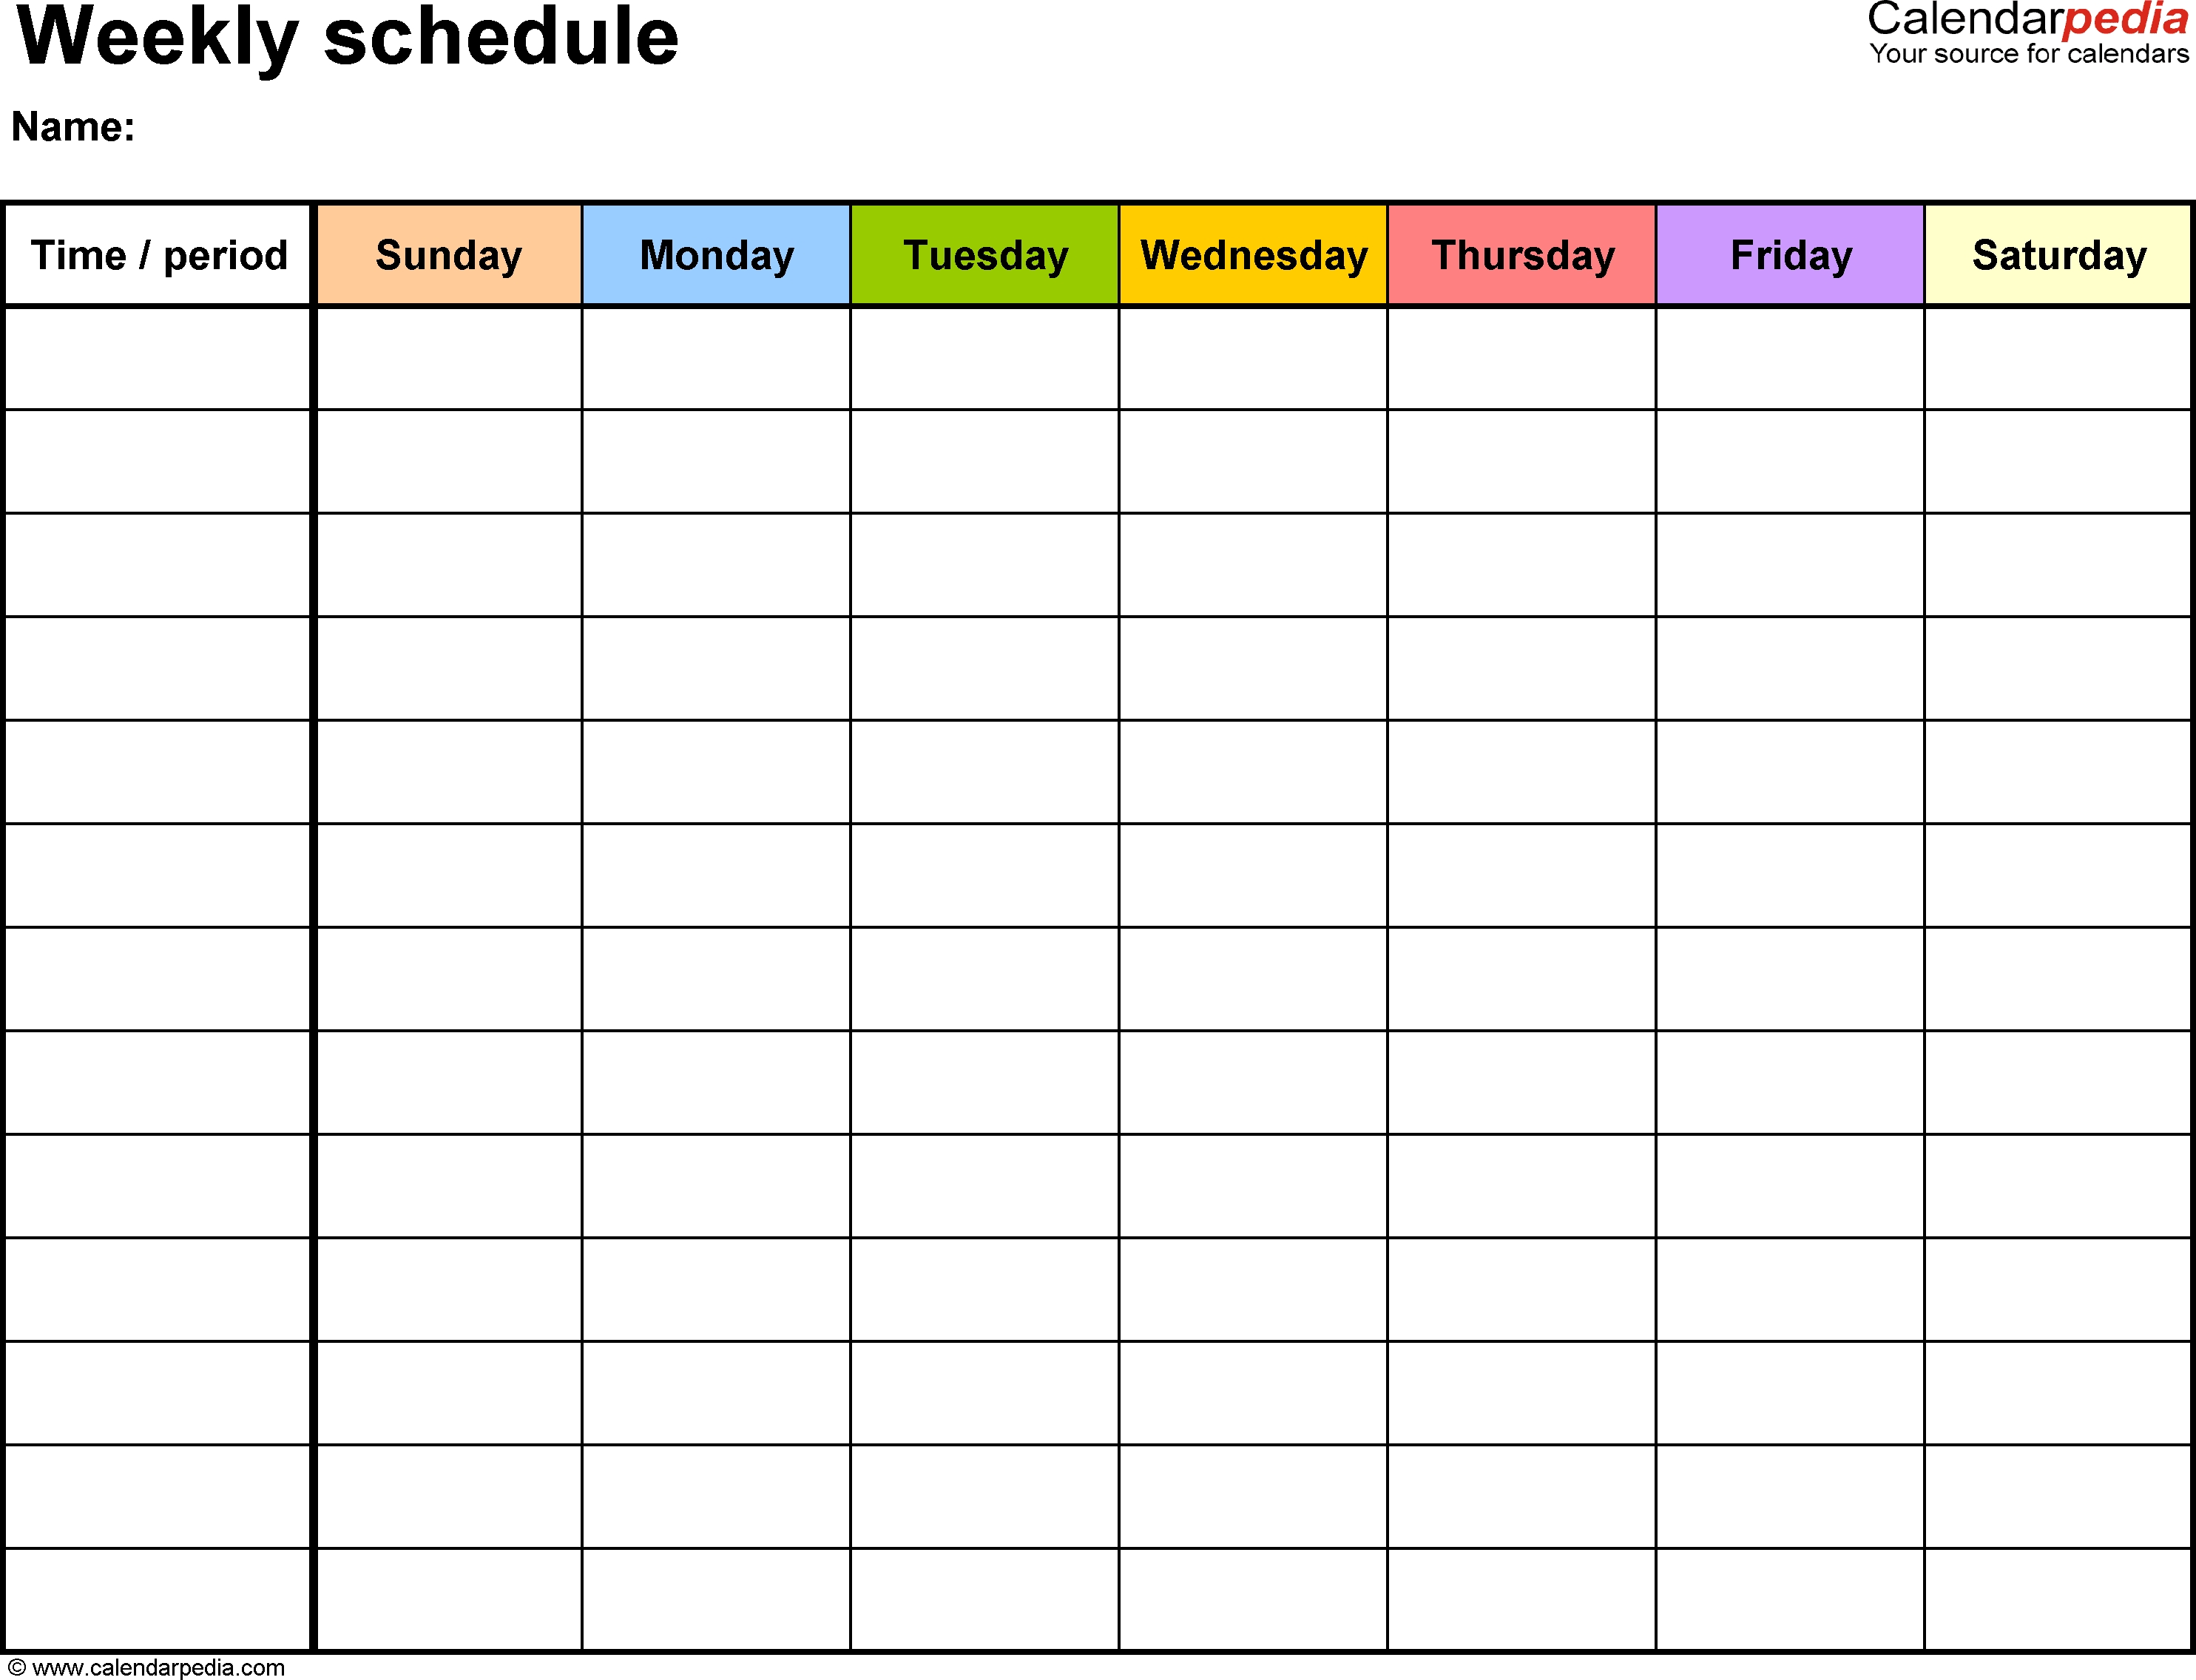 Free Weekly Schedule Templates For Word - 18 Templates within Calendar Monday Through Friday Schedule